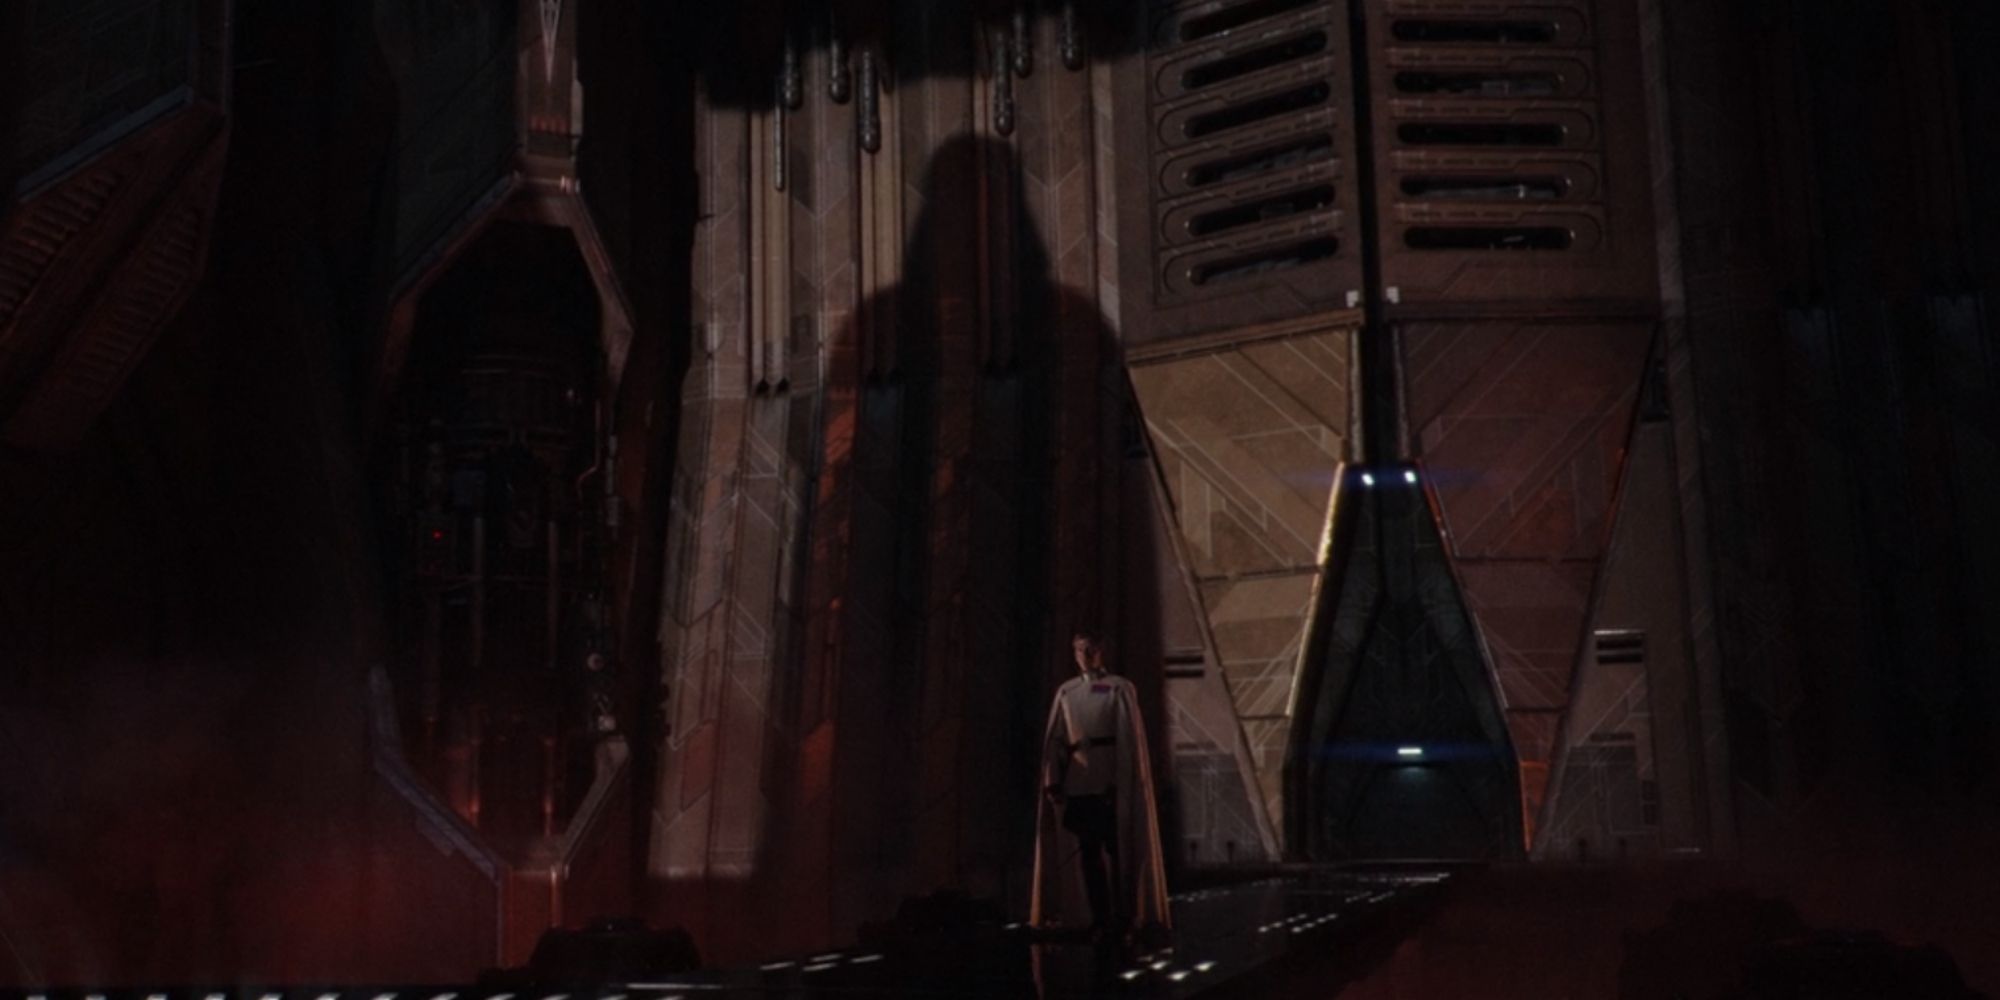 Darth Vader's shadow casting on the temple walls as Director Krennic watches in Rogue One A Star Wars Story